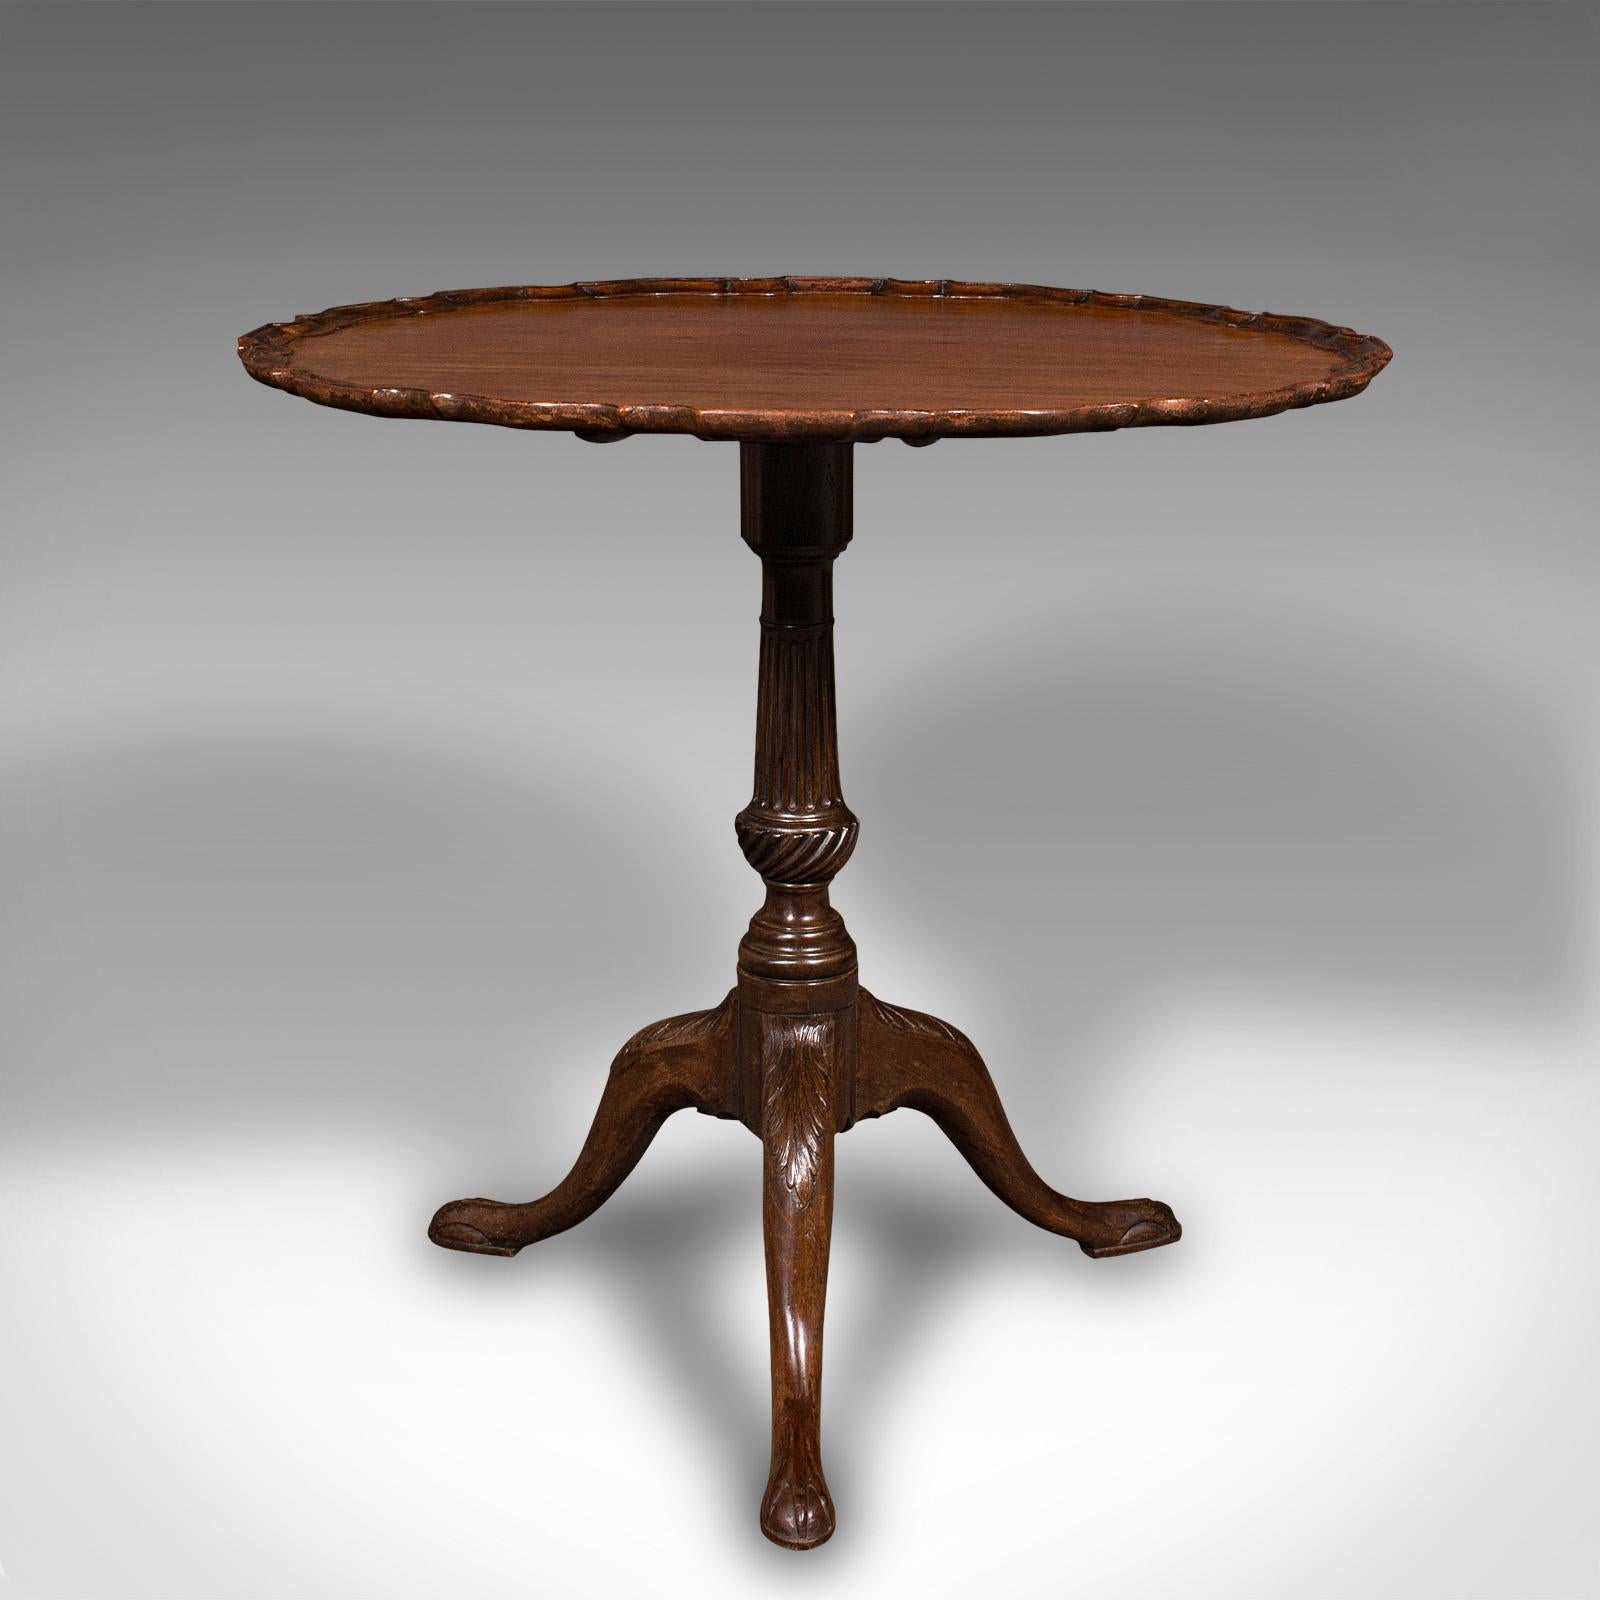 19th Century Antique Pie Crust Lamp Table, English, Tilt Top, Occasional, Victorian, C.1870 For Sale